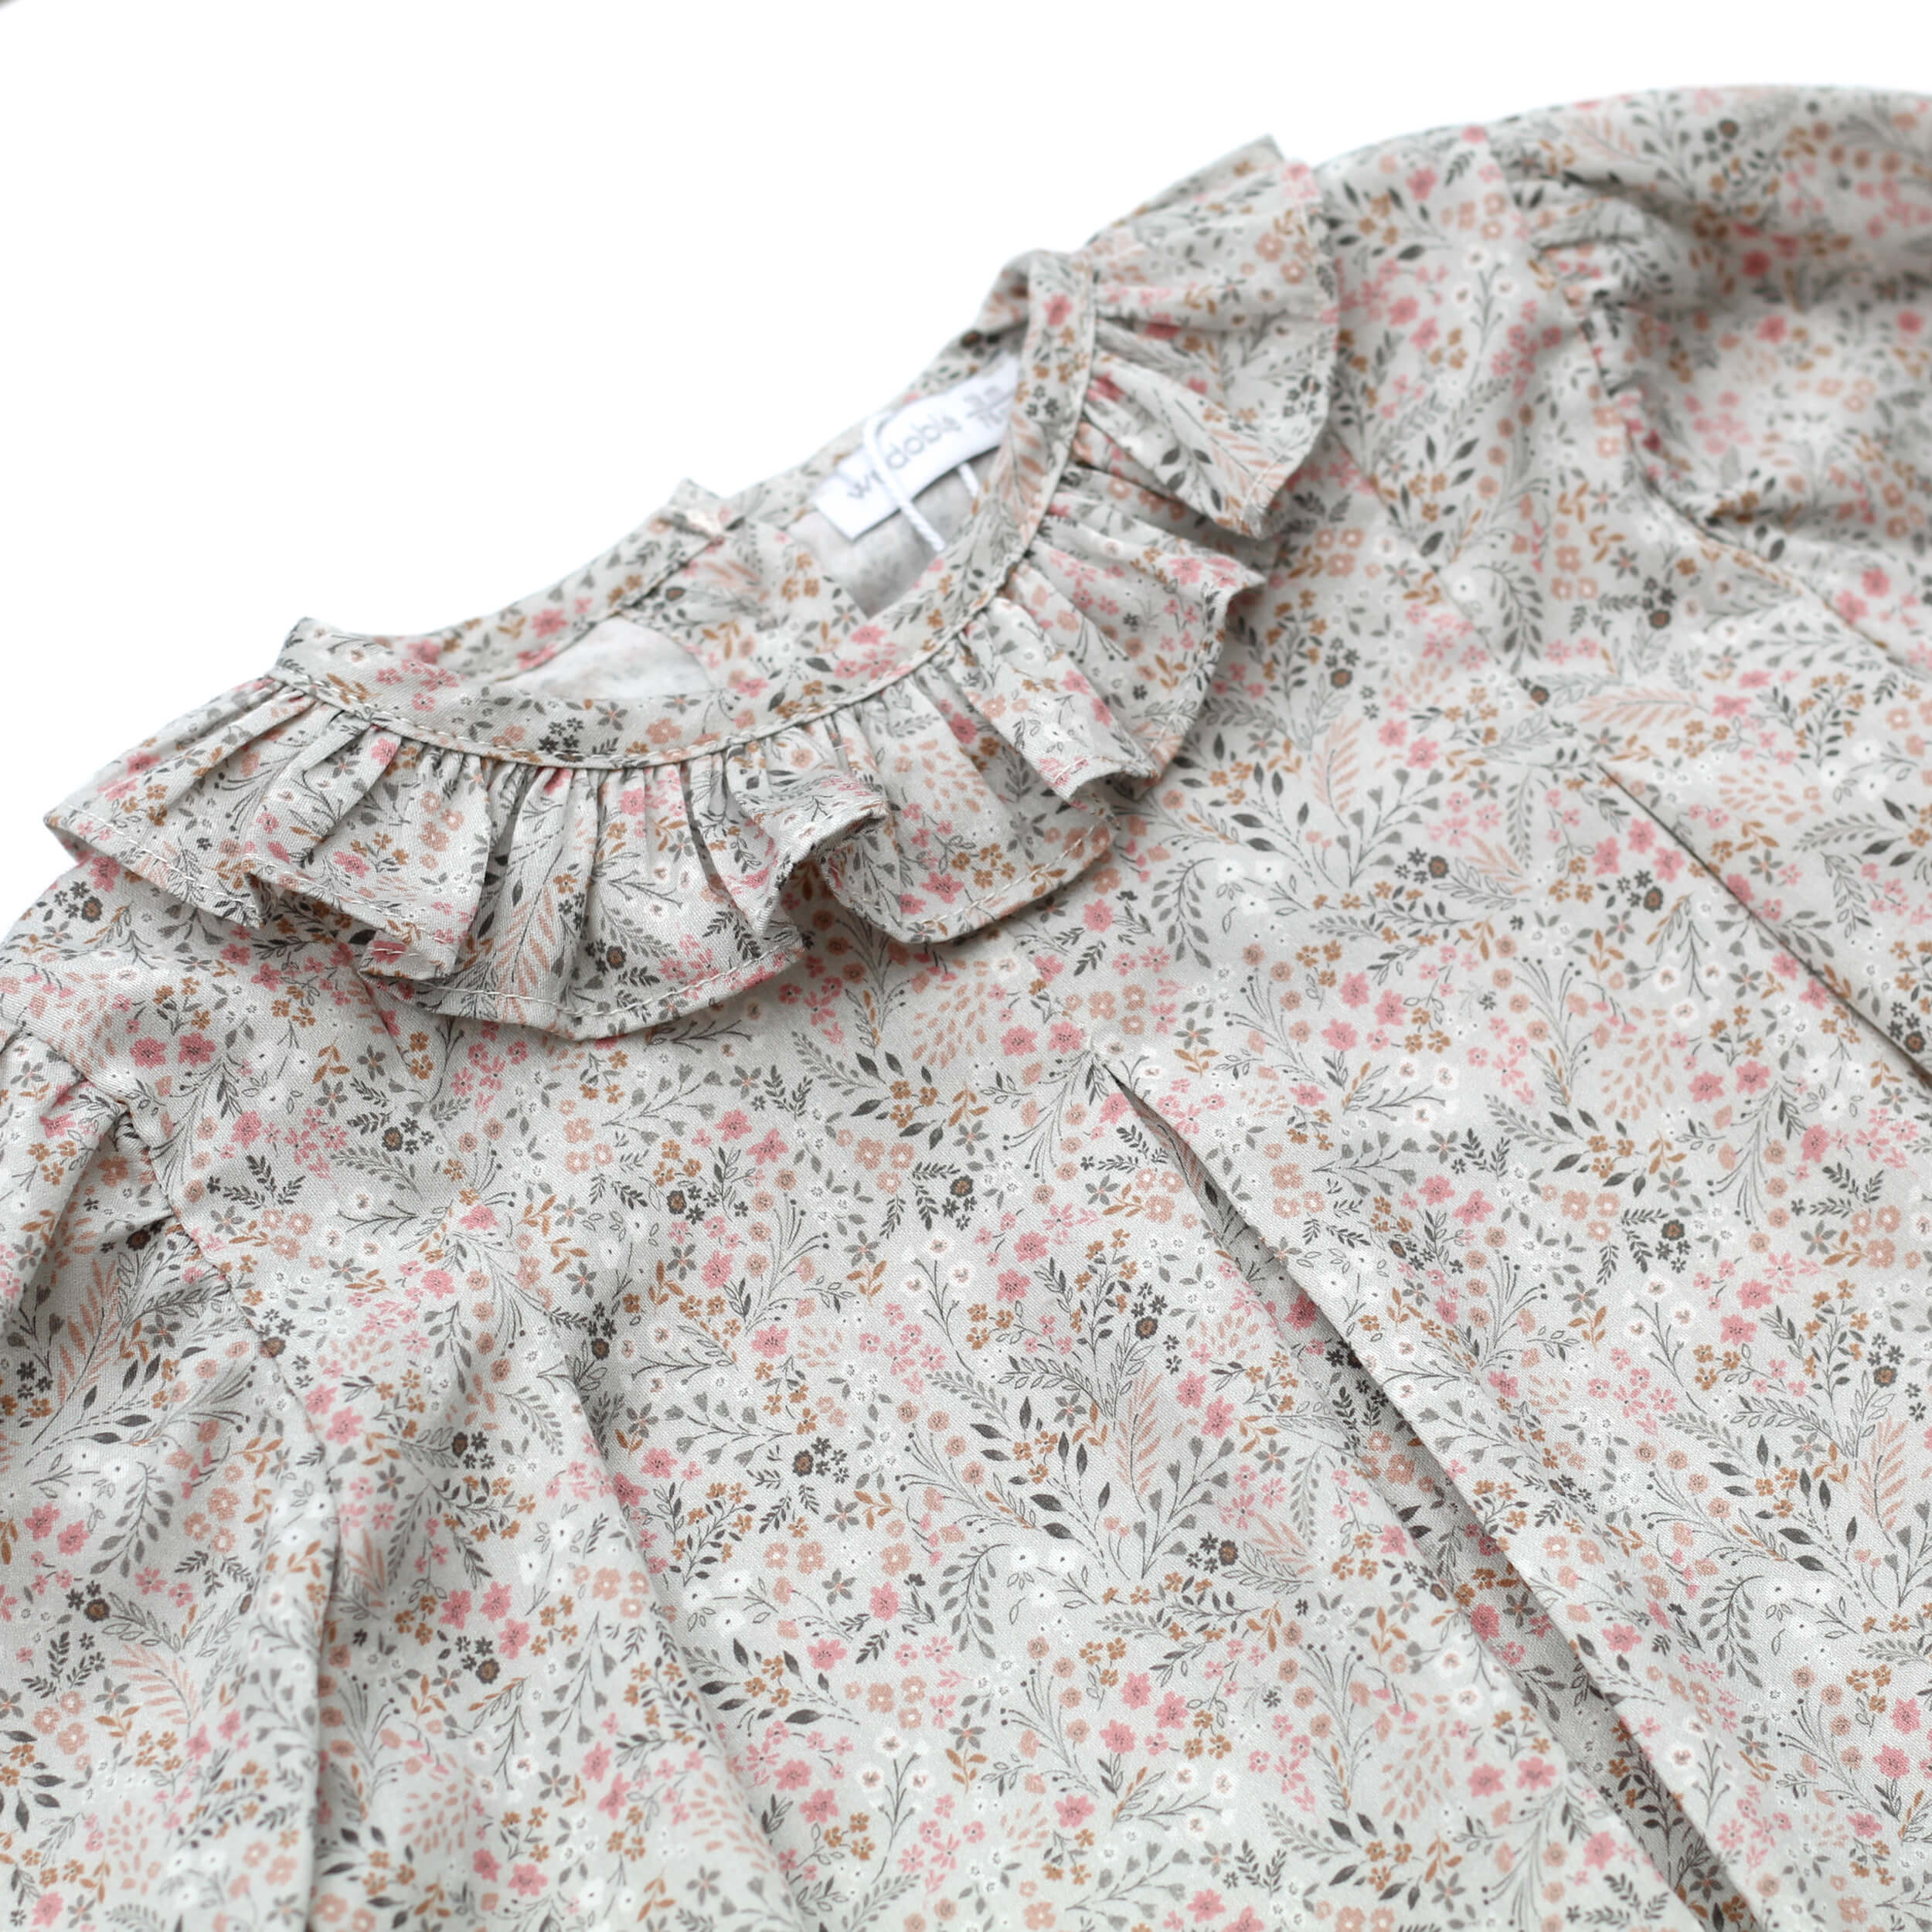 Wedoble grey floral frill collar baby blouse, made in portugal